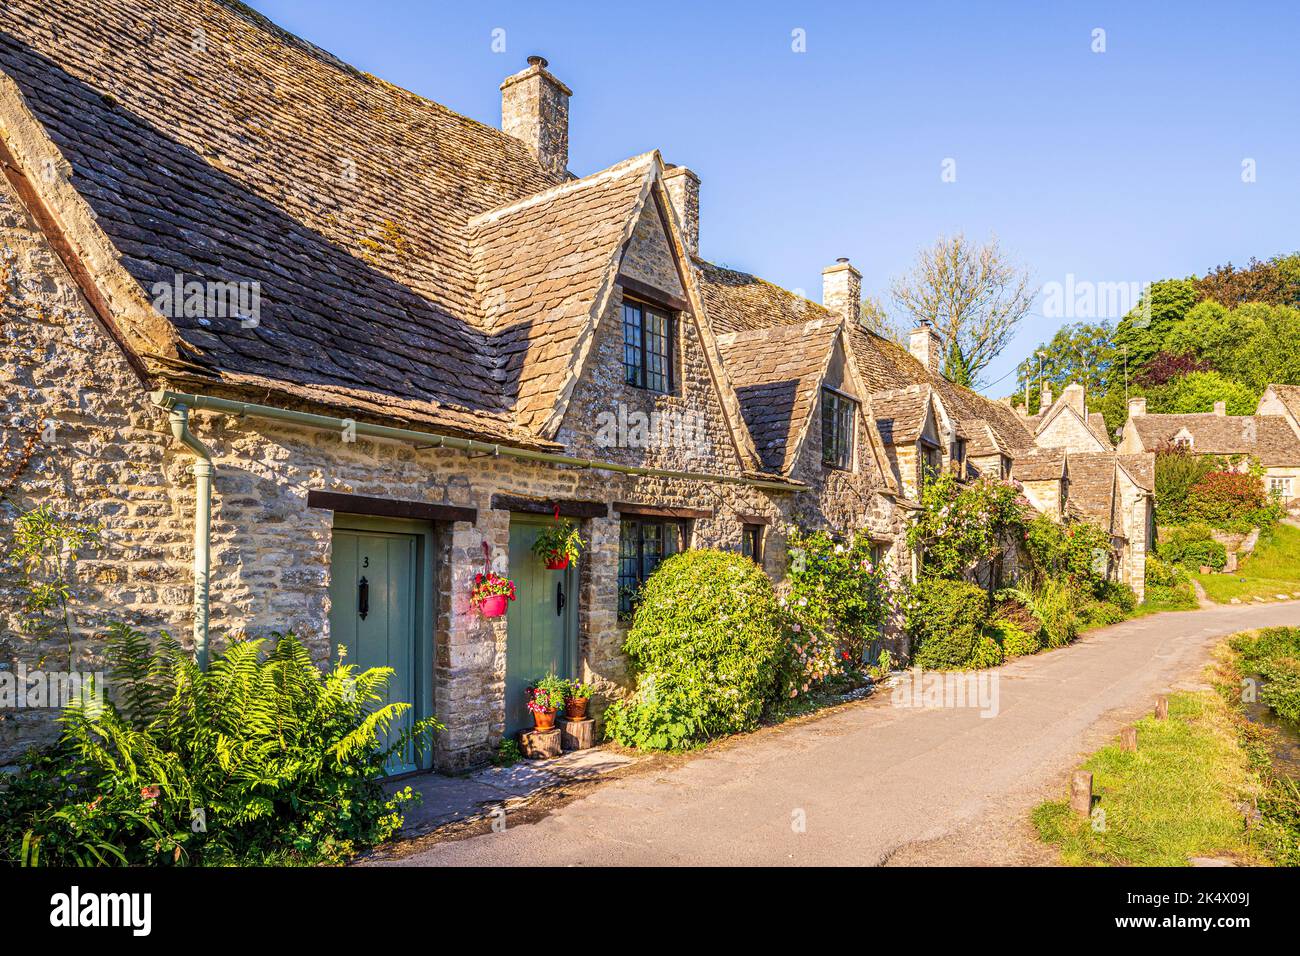 Early morning light in midsummer on Arlington Row in the Cotswold village of Bibury, Gloucestershire, England UK Stock Photo